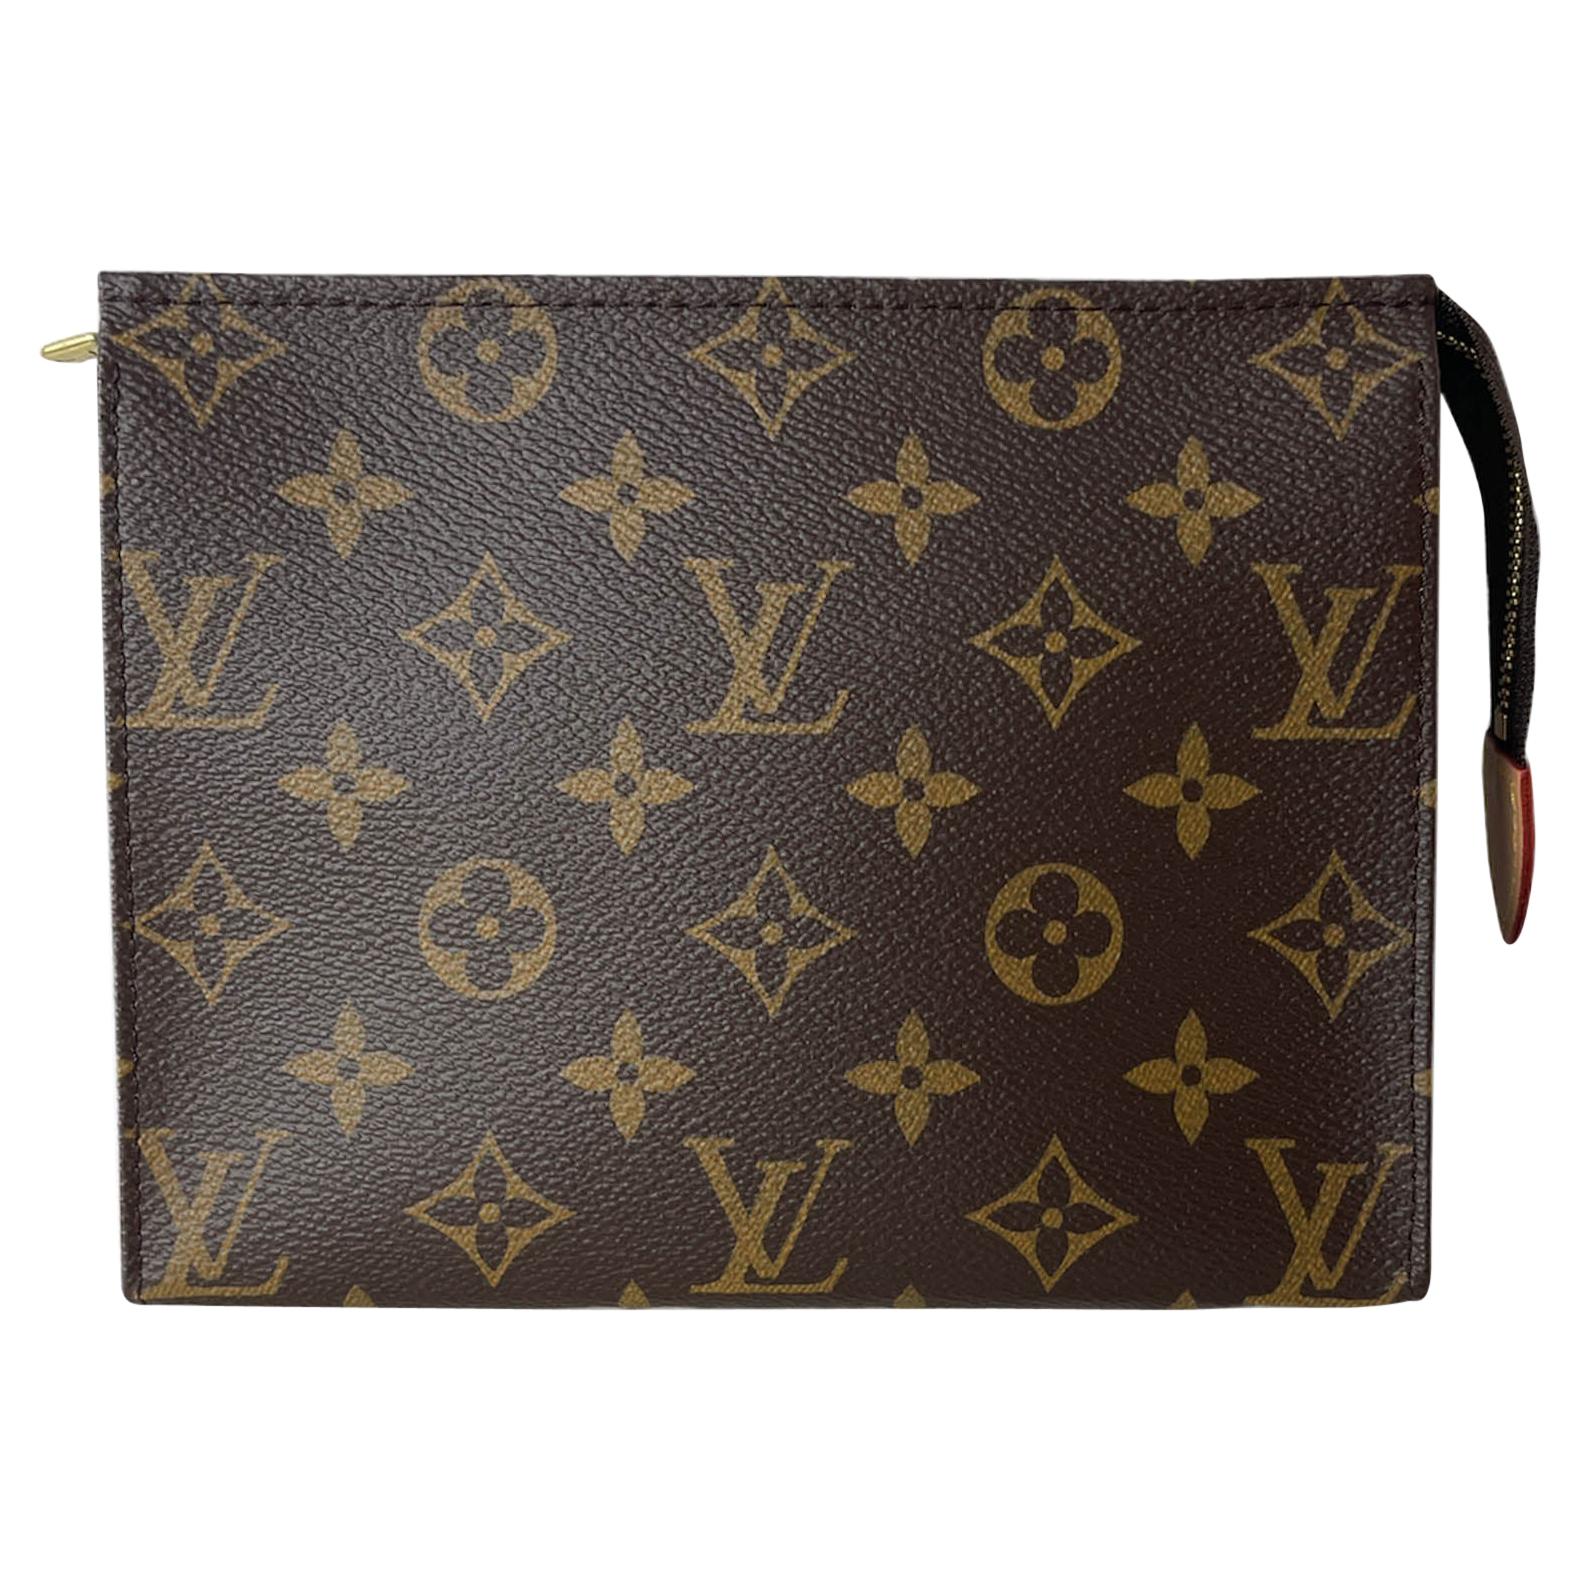 Louis Vuitton SOLD OUT DISCONTINUED Monogram Toiletry Pouch 19 Bag